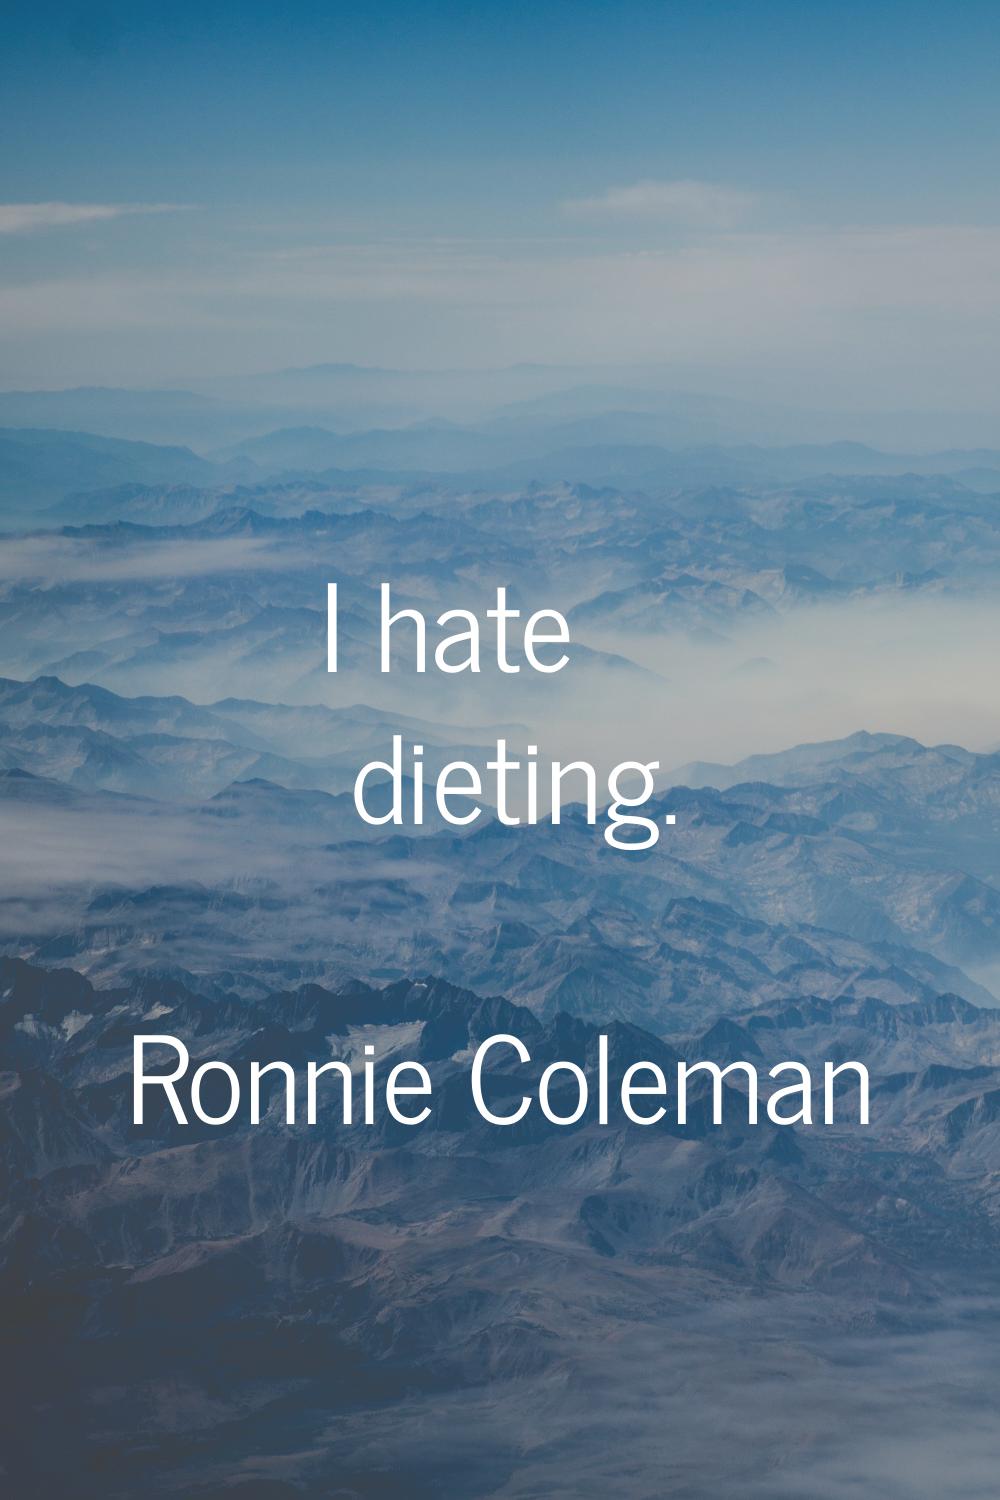 I hate dieting.